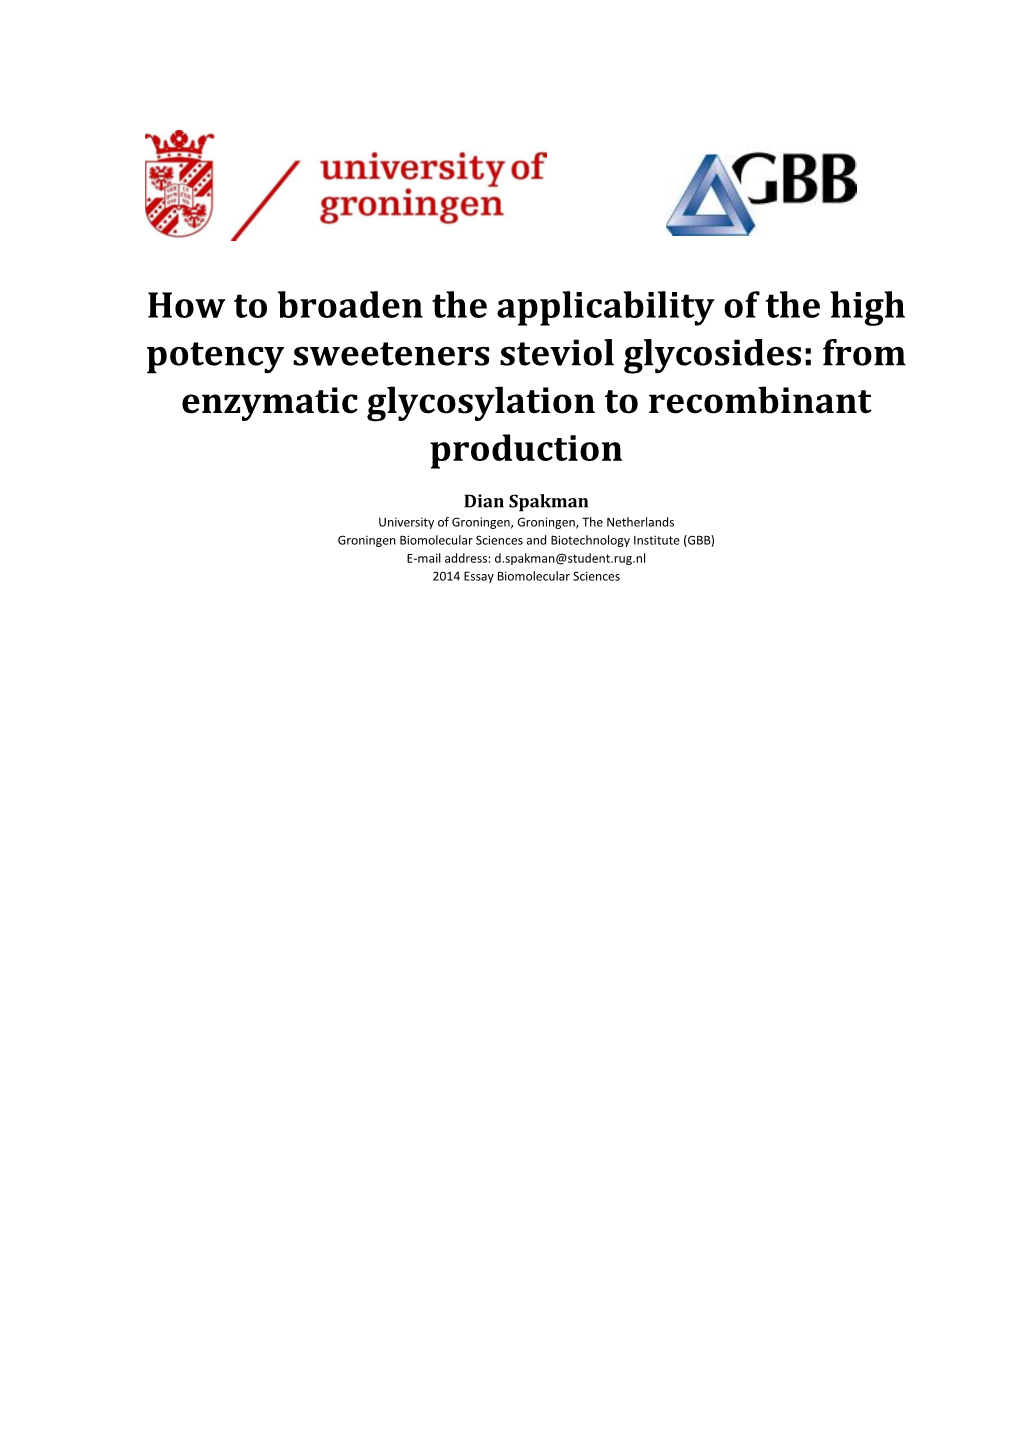 How to Broaden the Applicability of the High Potency Sweeteners Steviol Glycosides: from Enzymatic Glycosylation to Recombinant